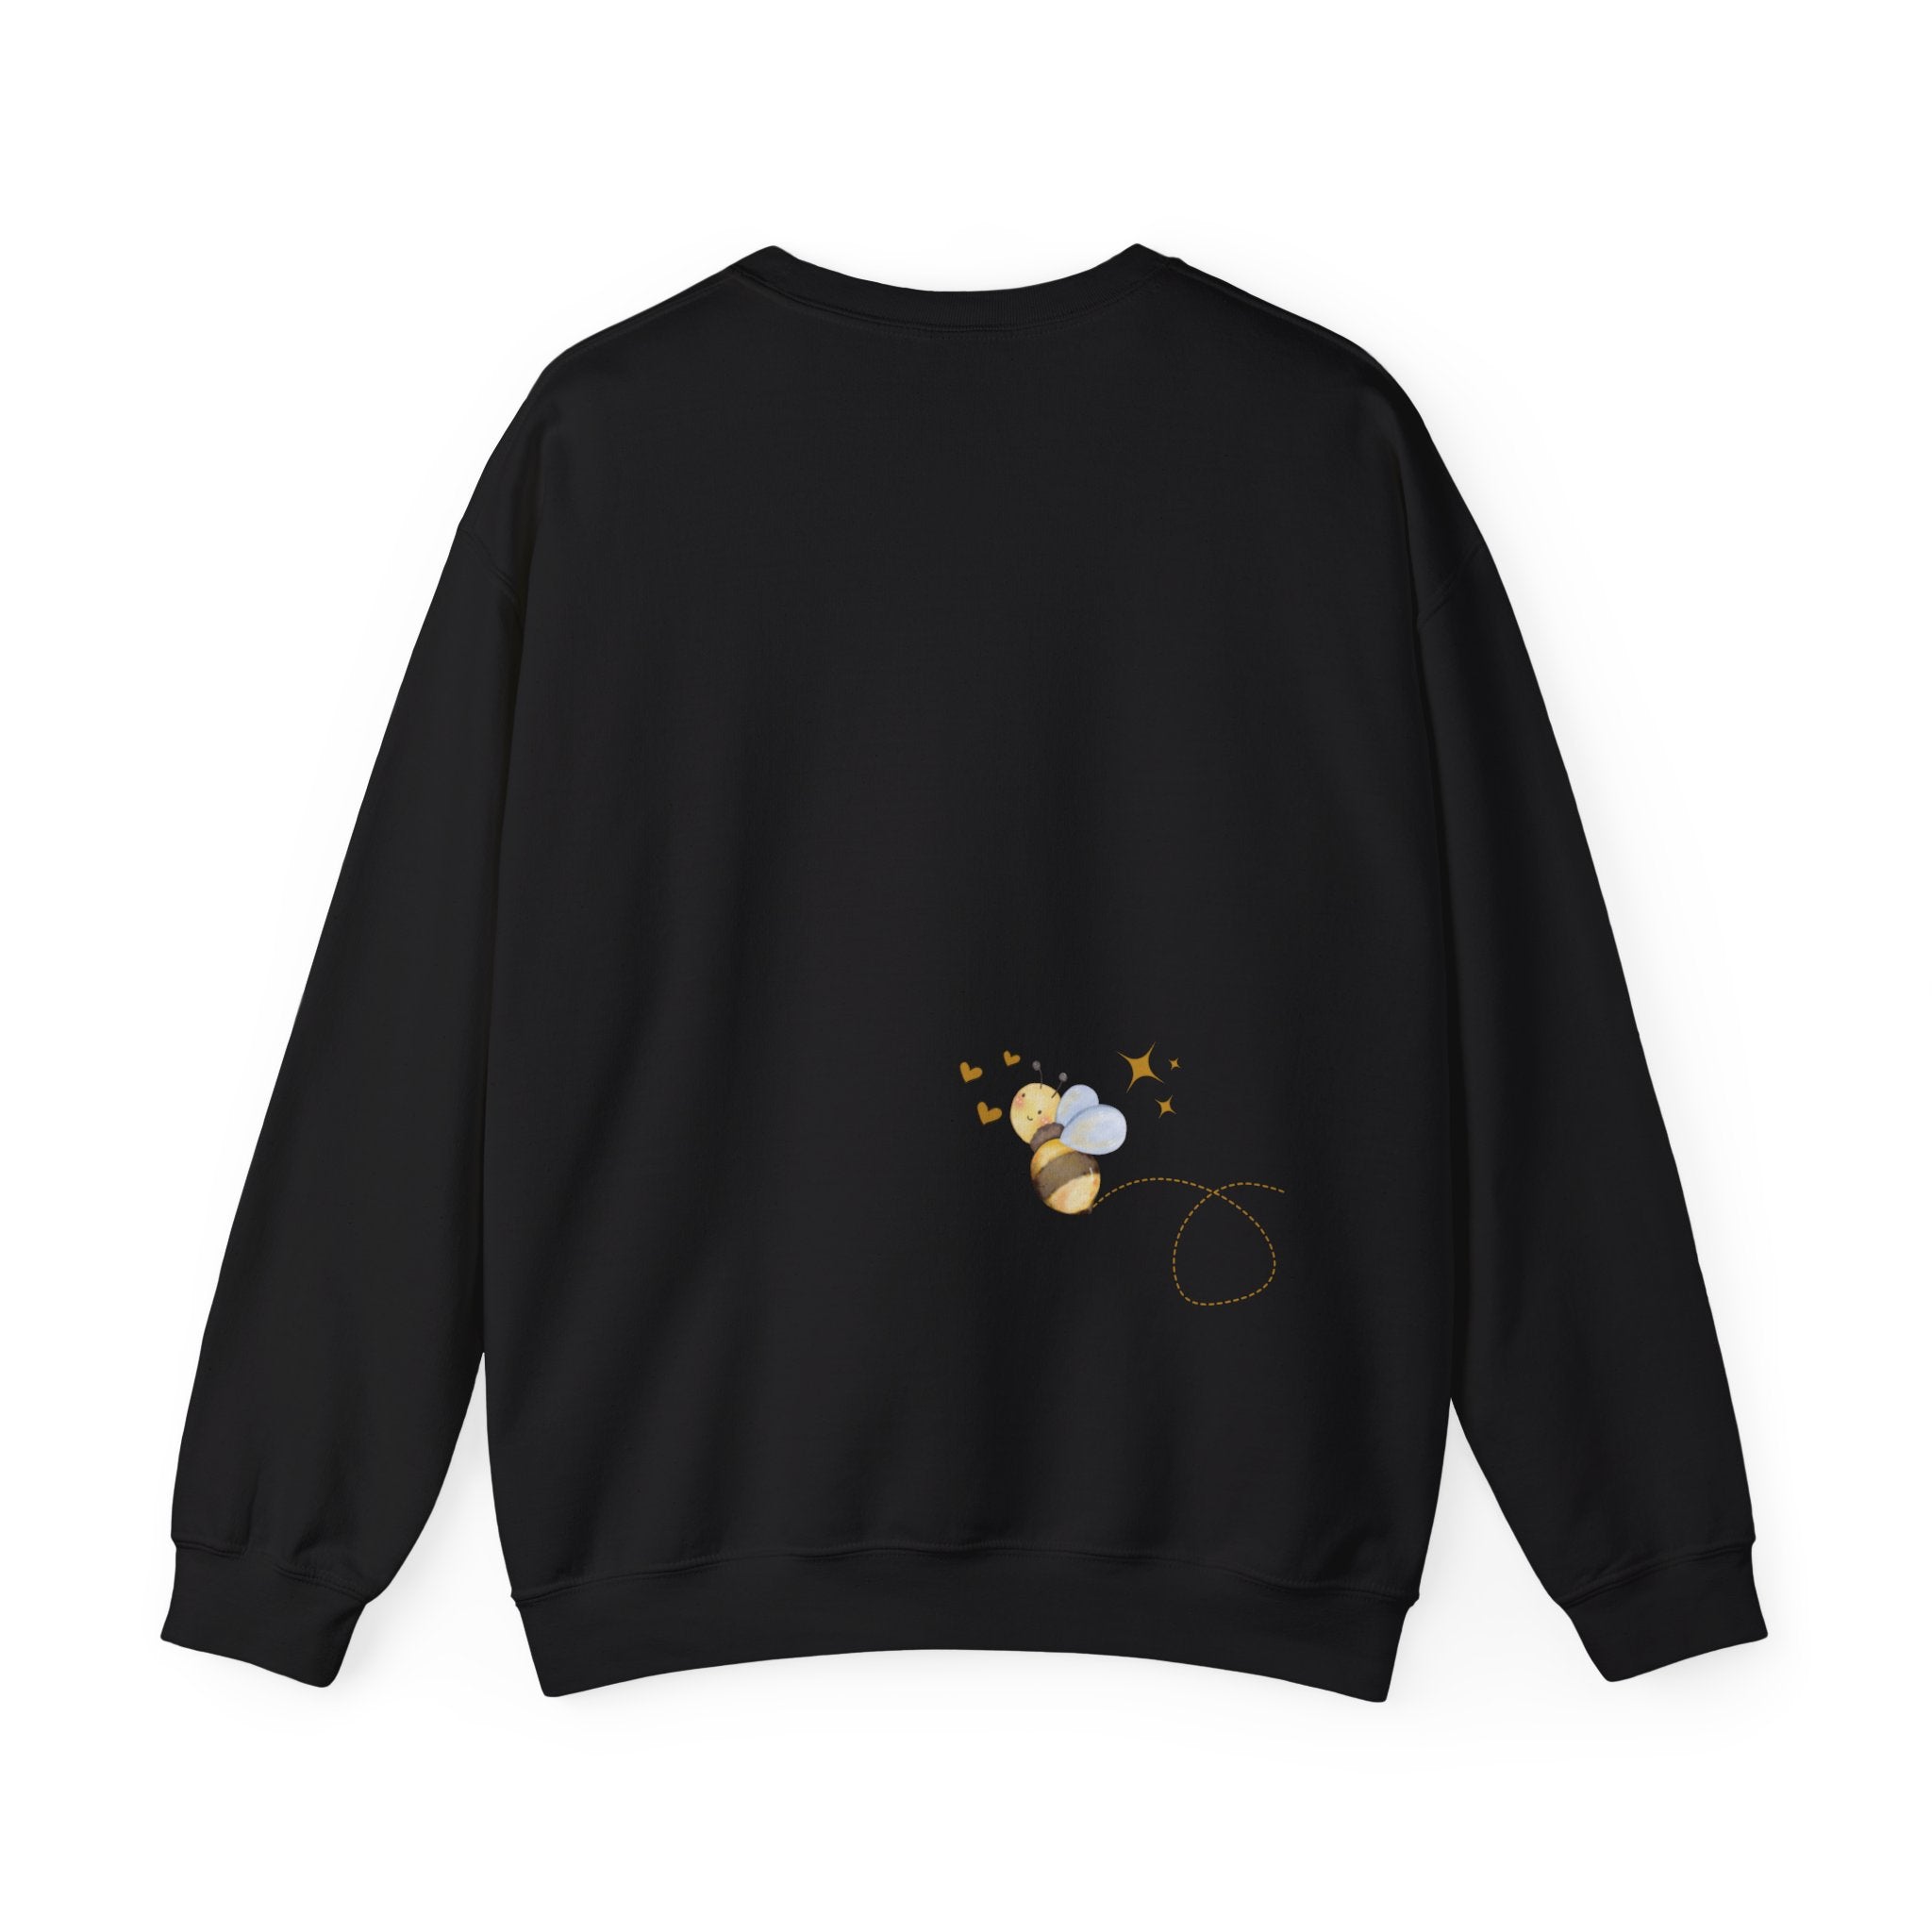 Bee Kind Bumblebee inspired ladies Sweatshirt with bee detail on front and back